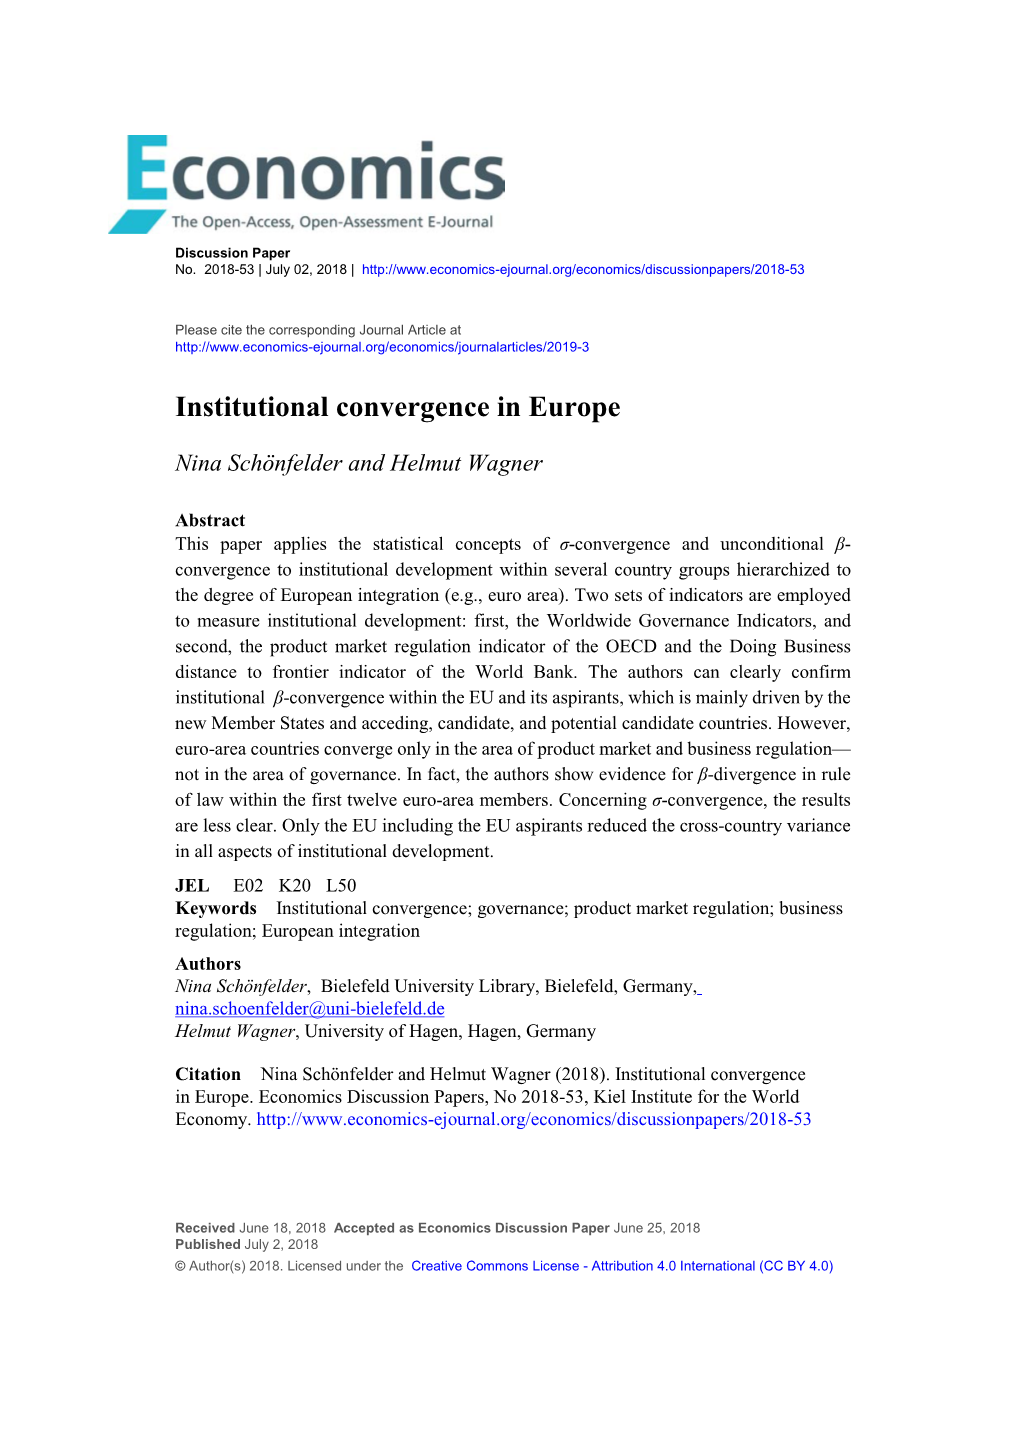 Institutional Convergence in Europe